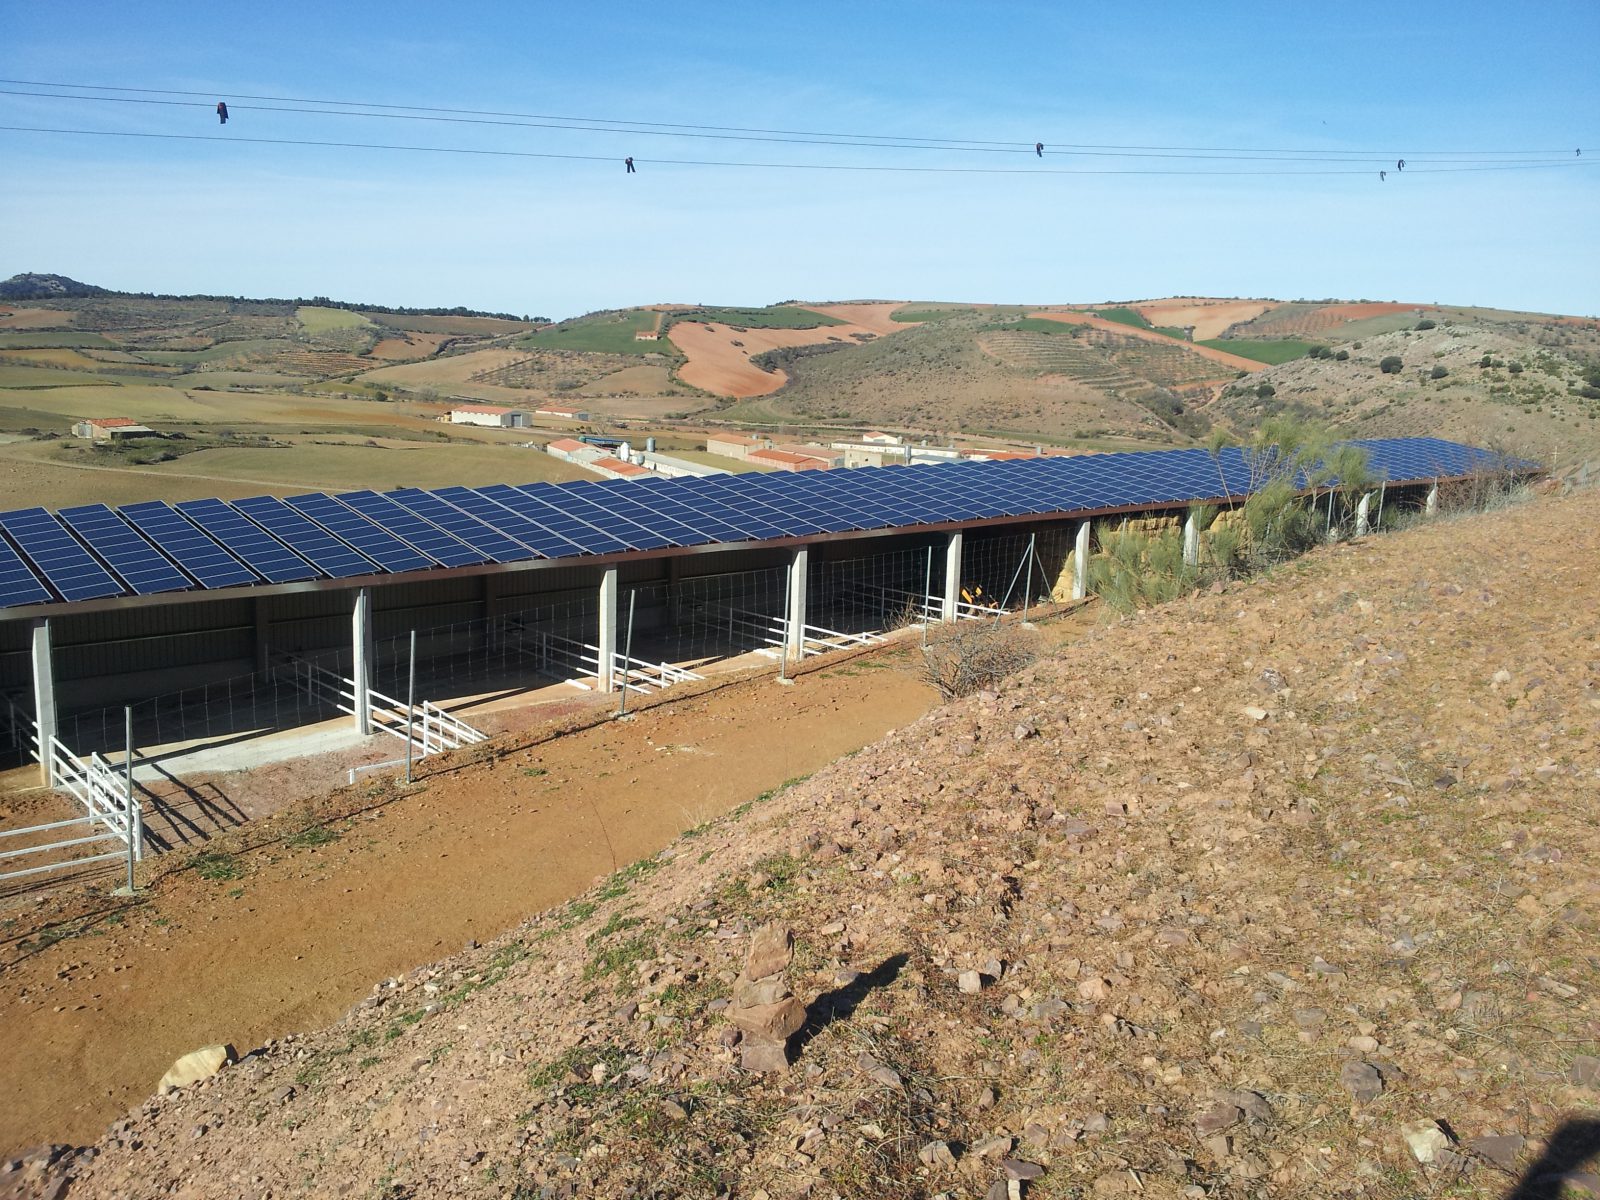 Photovoltaic rooftop project carried of 360 kW